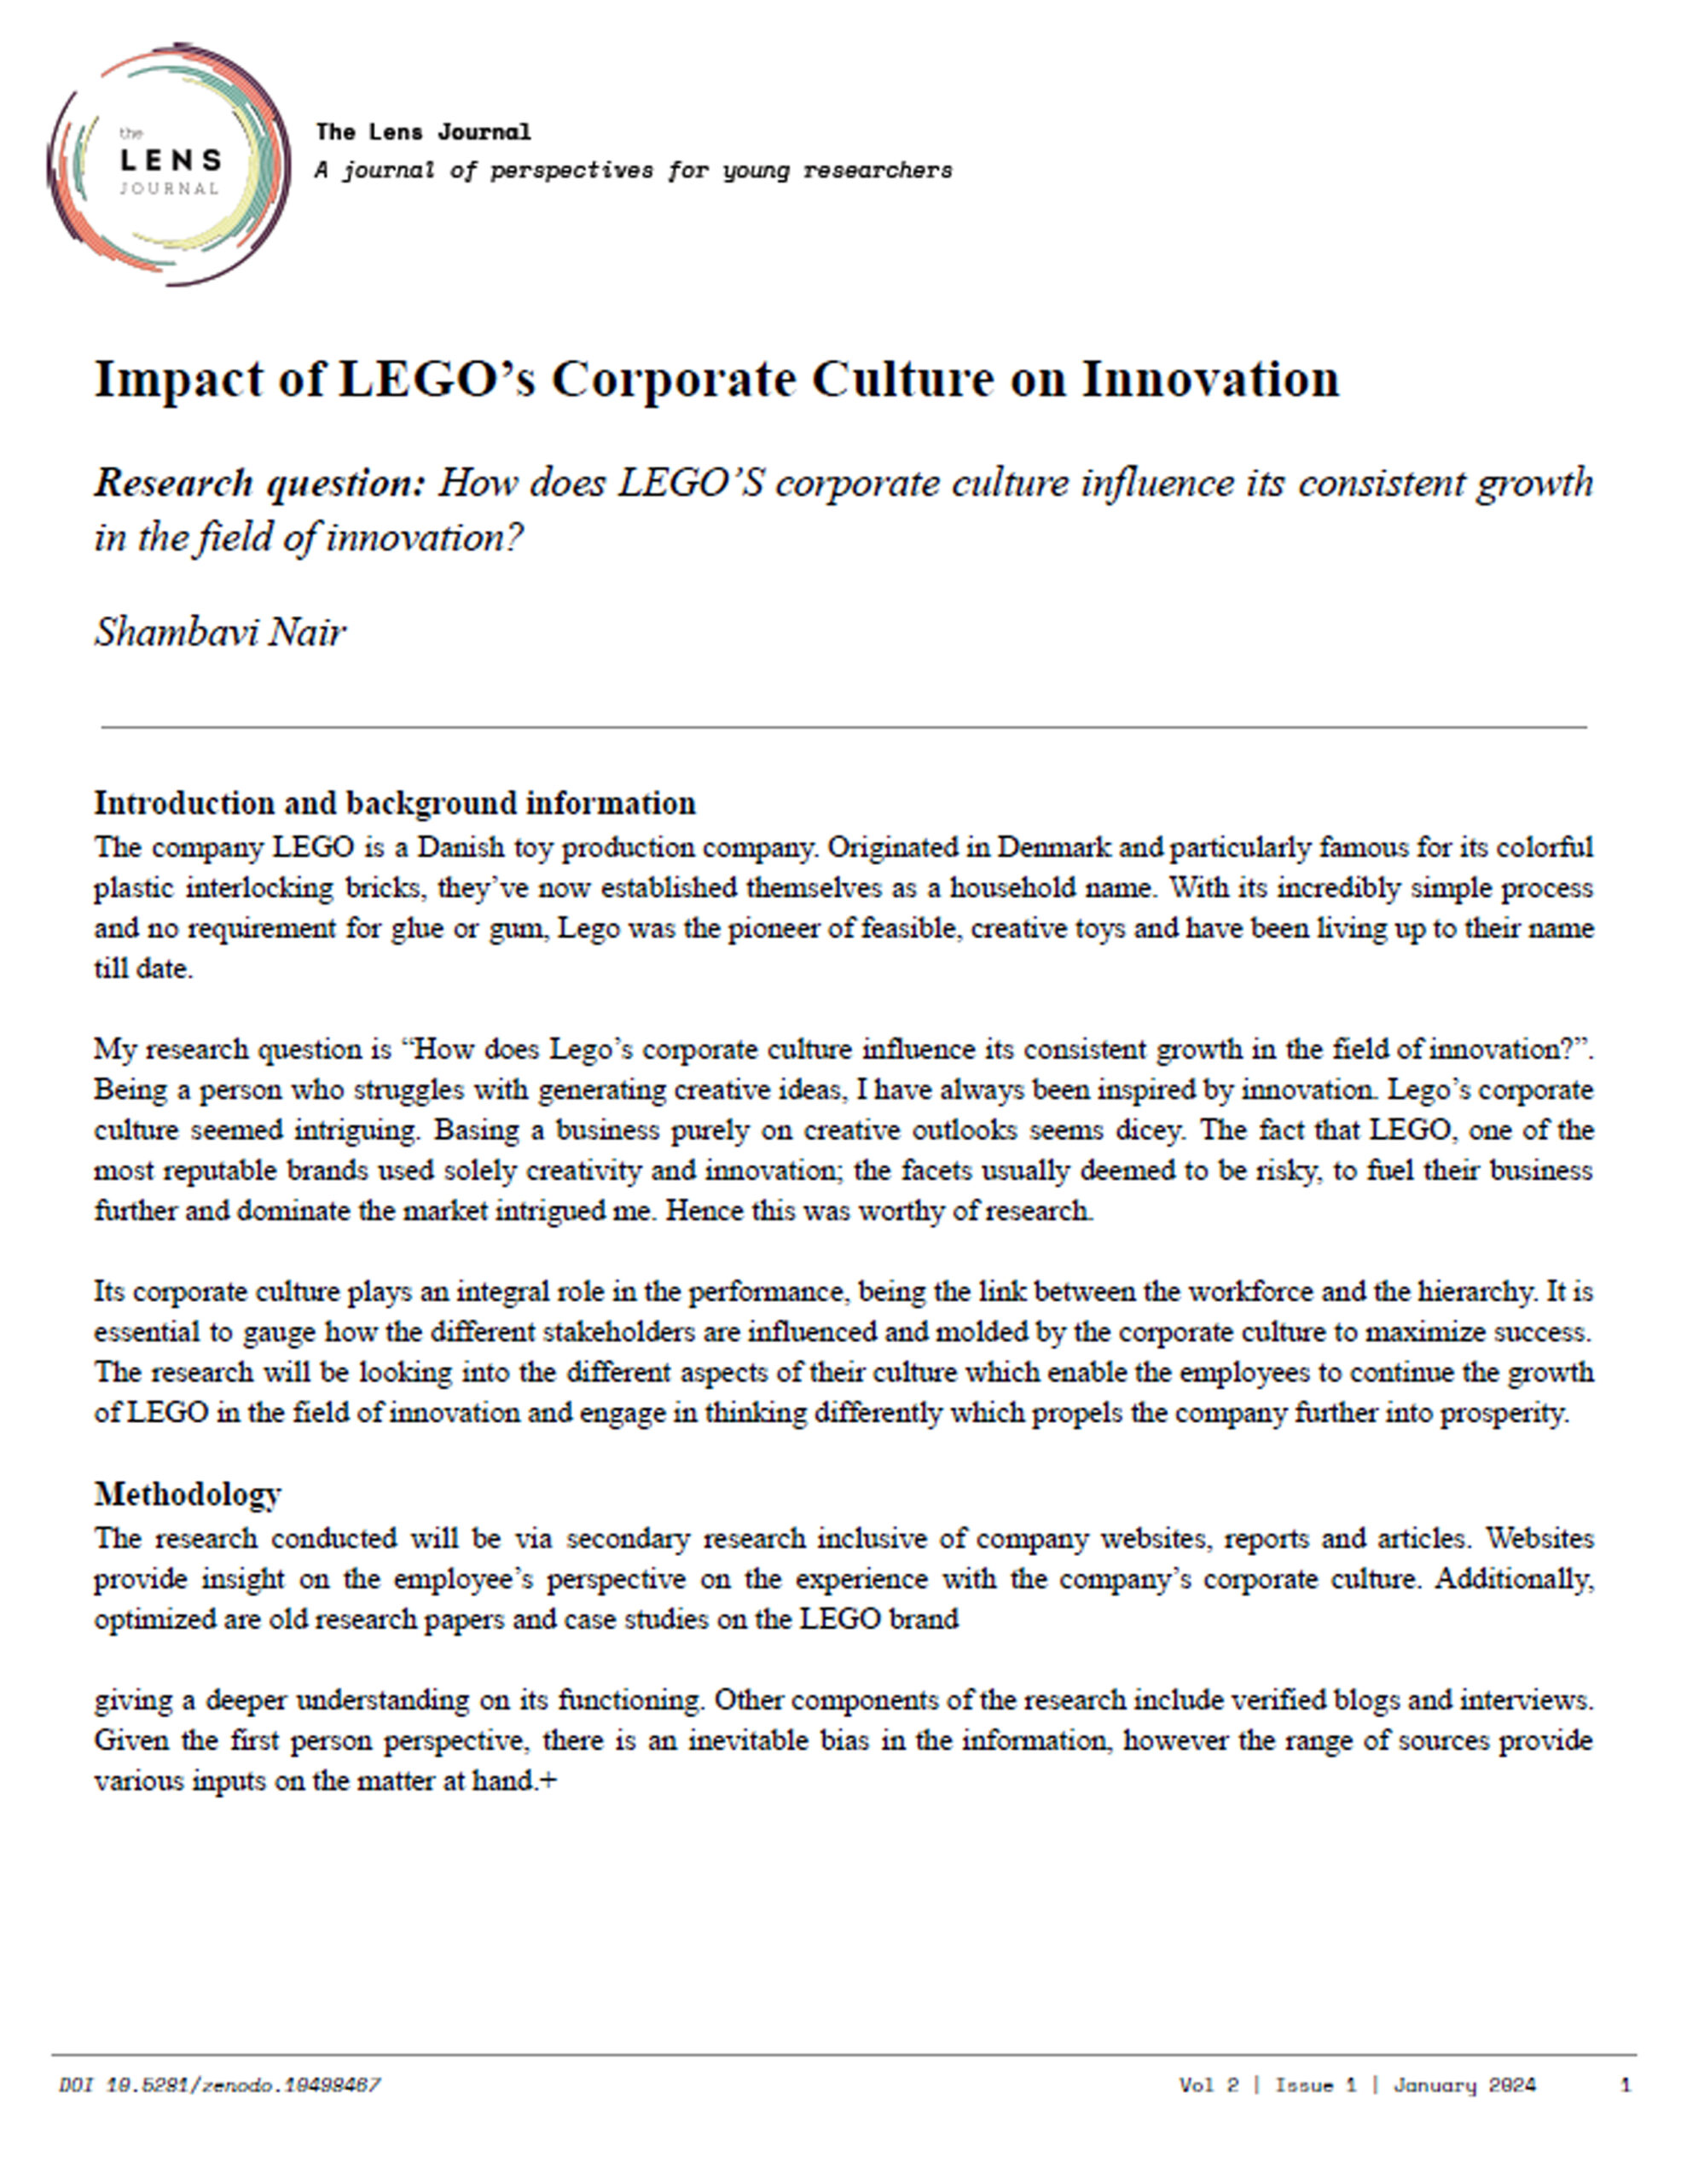 Impact of LEGO’s Corporate Culture on Innovation